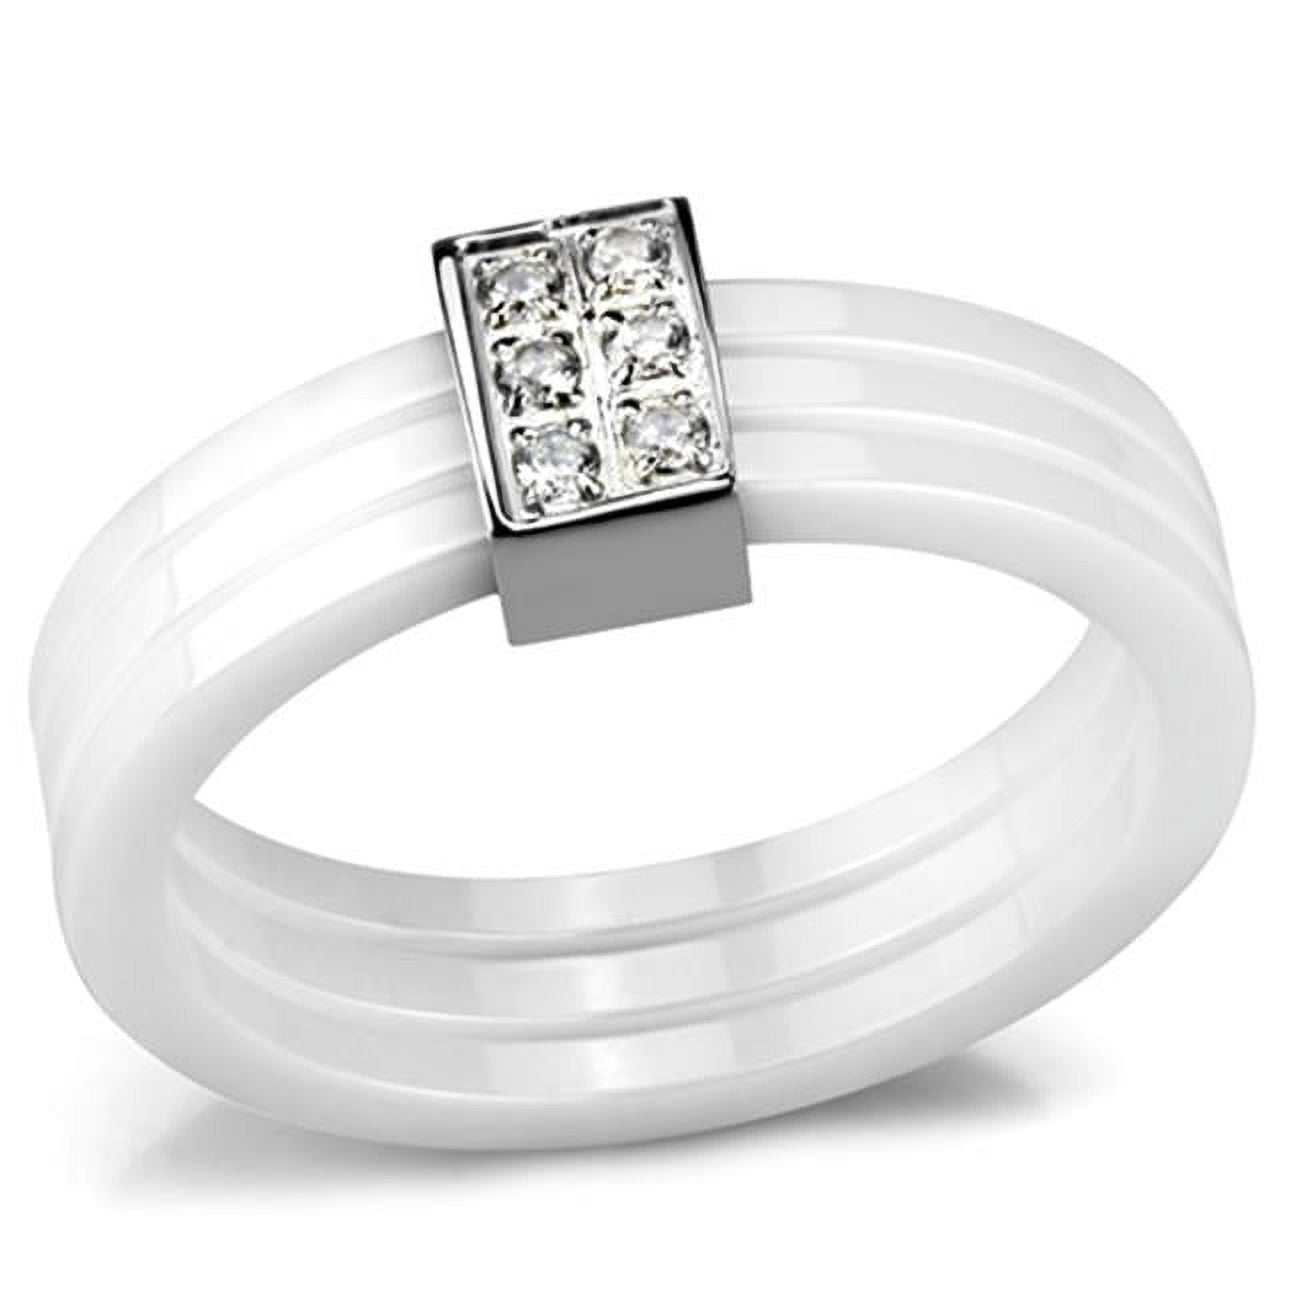 Picture of Alamode 3W981-6 Women High Polished Stainless Steel Ring with Ceramic in White - Size 6